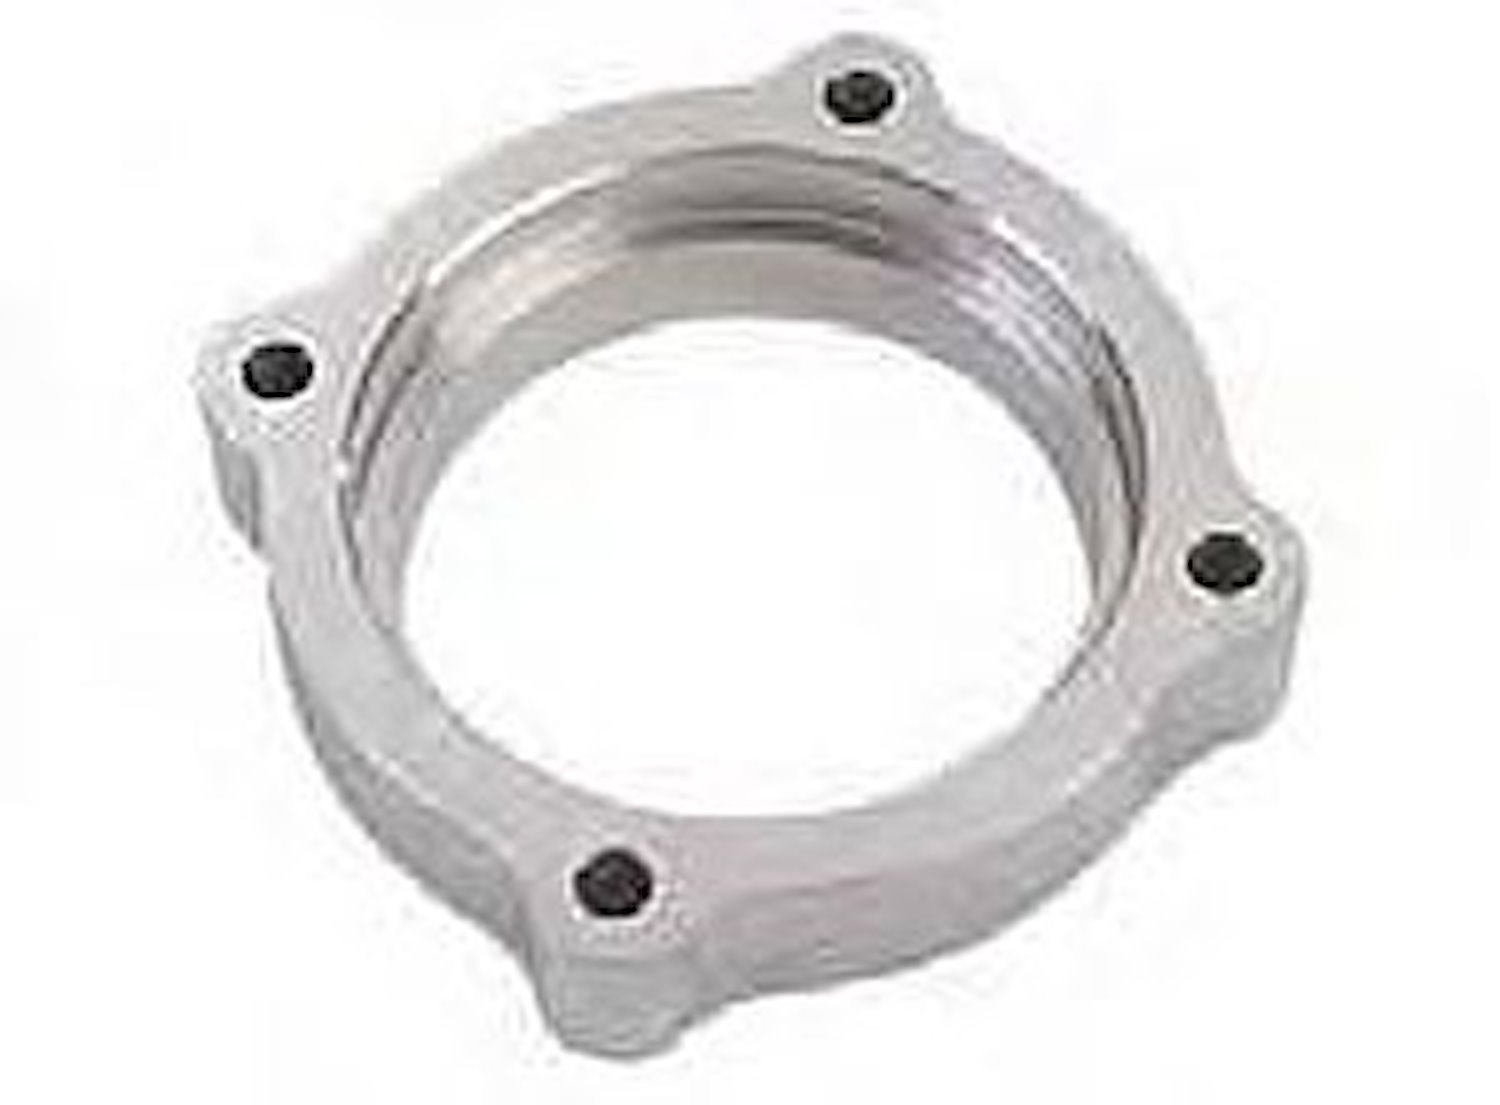 Replacement Water Pump Mount Fits All A8/Aluminum "A" Blocks